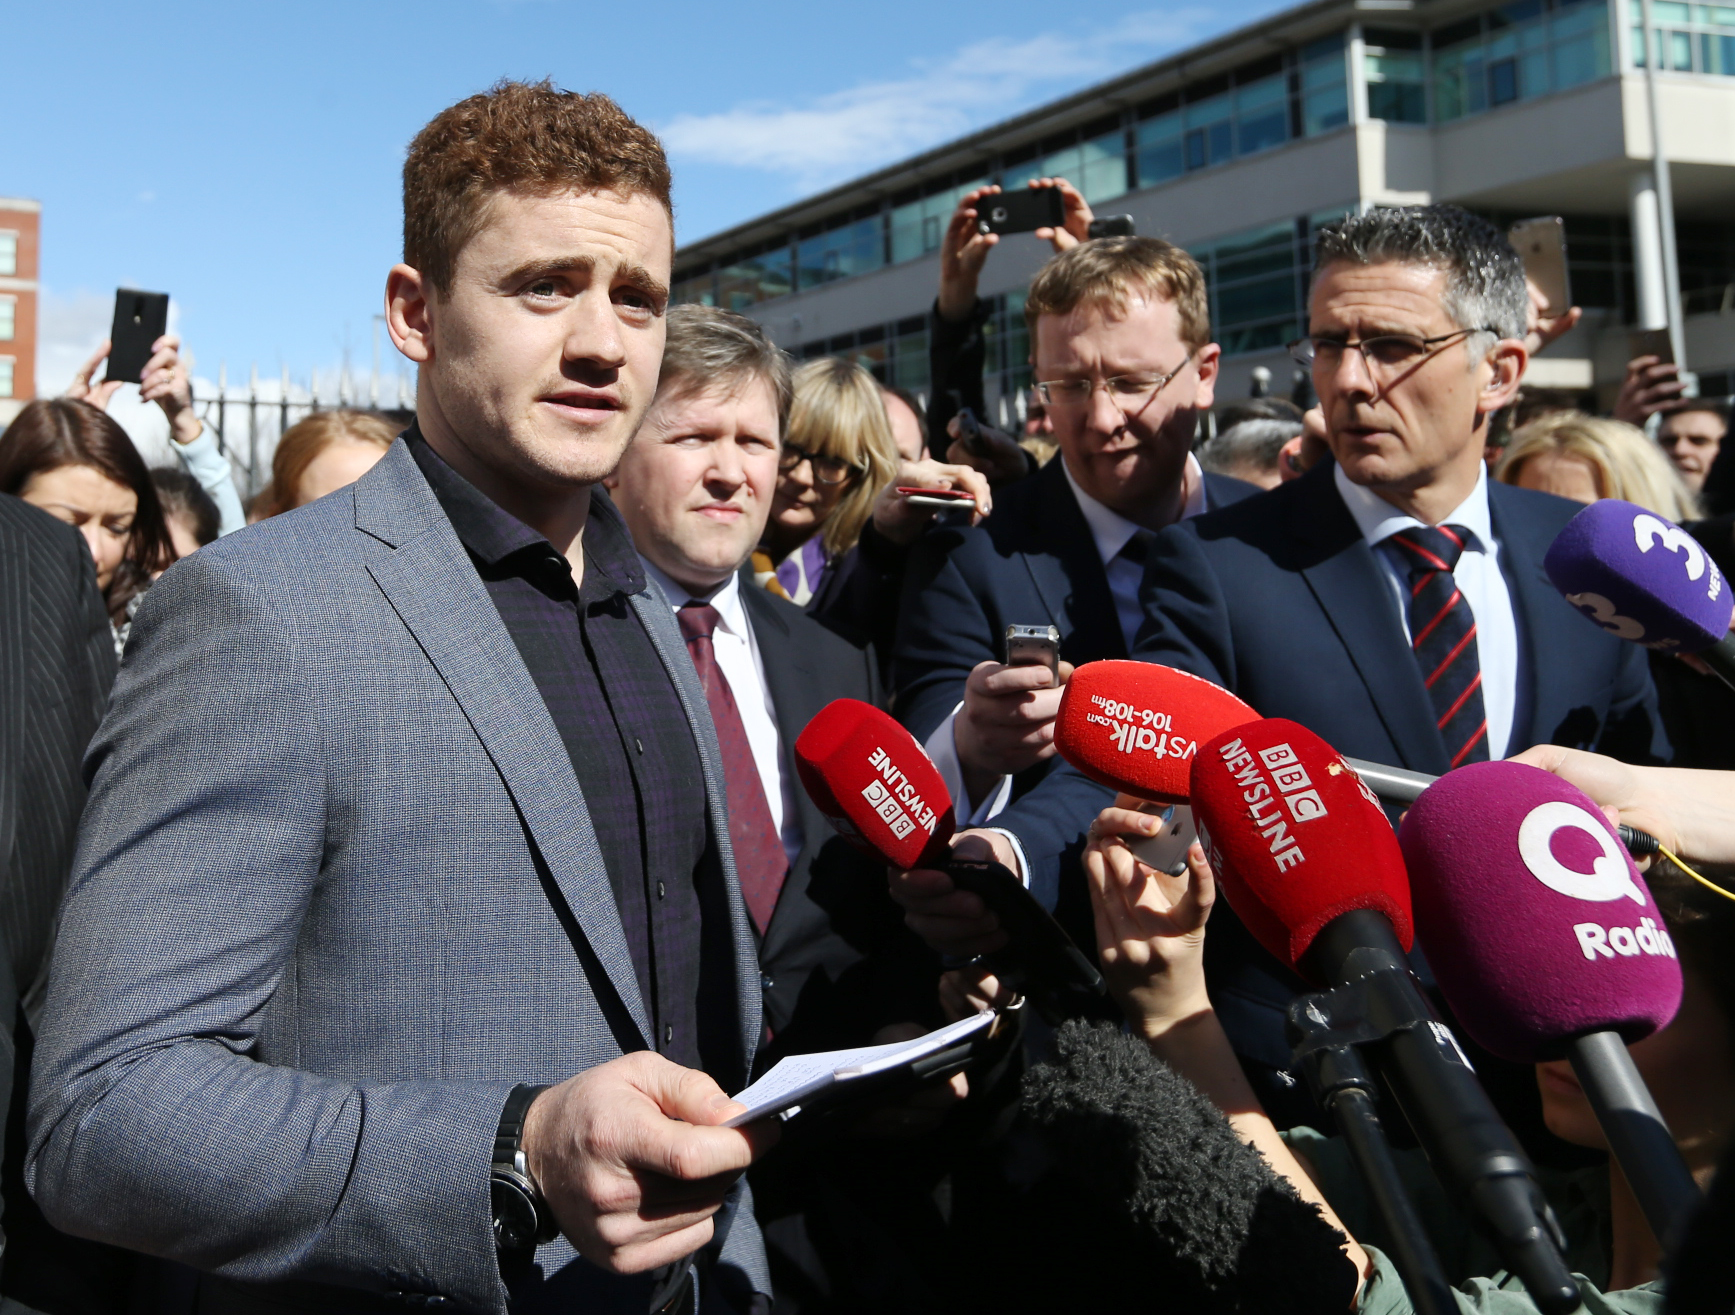 Paddy Jackson making a statement outside Laganside Courts in Belfast after being declared not guilty, 23/03/2018. Image: Sam Boal/Rollingnews.ie